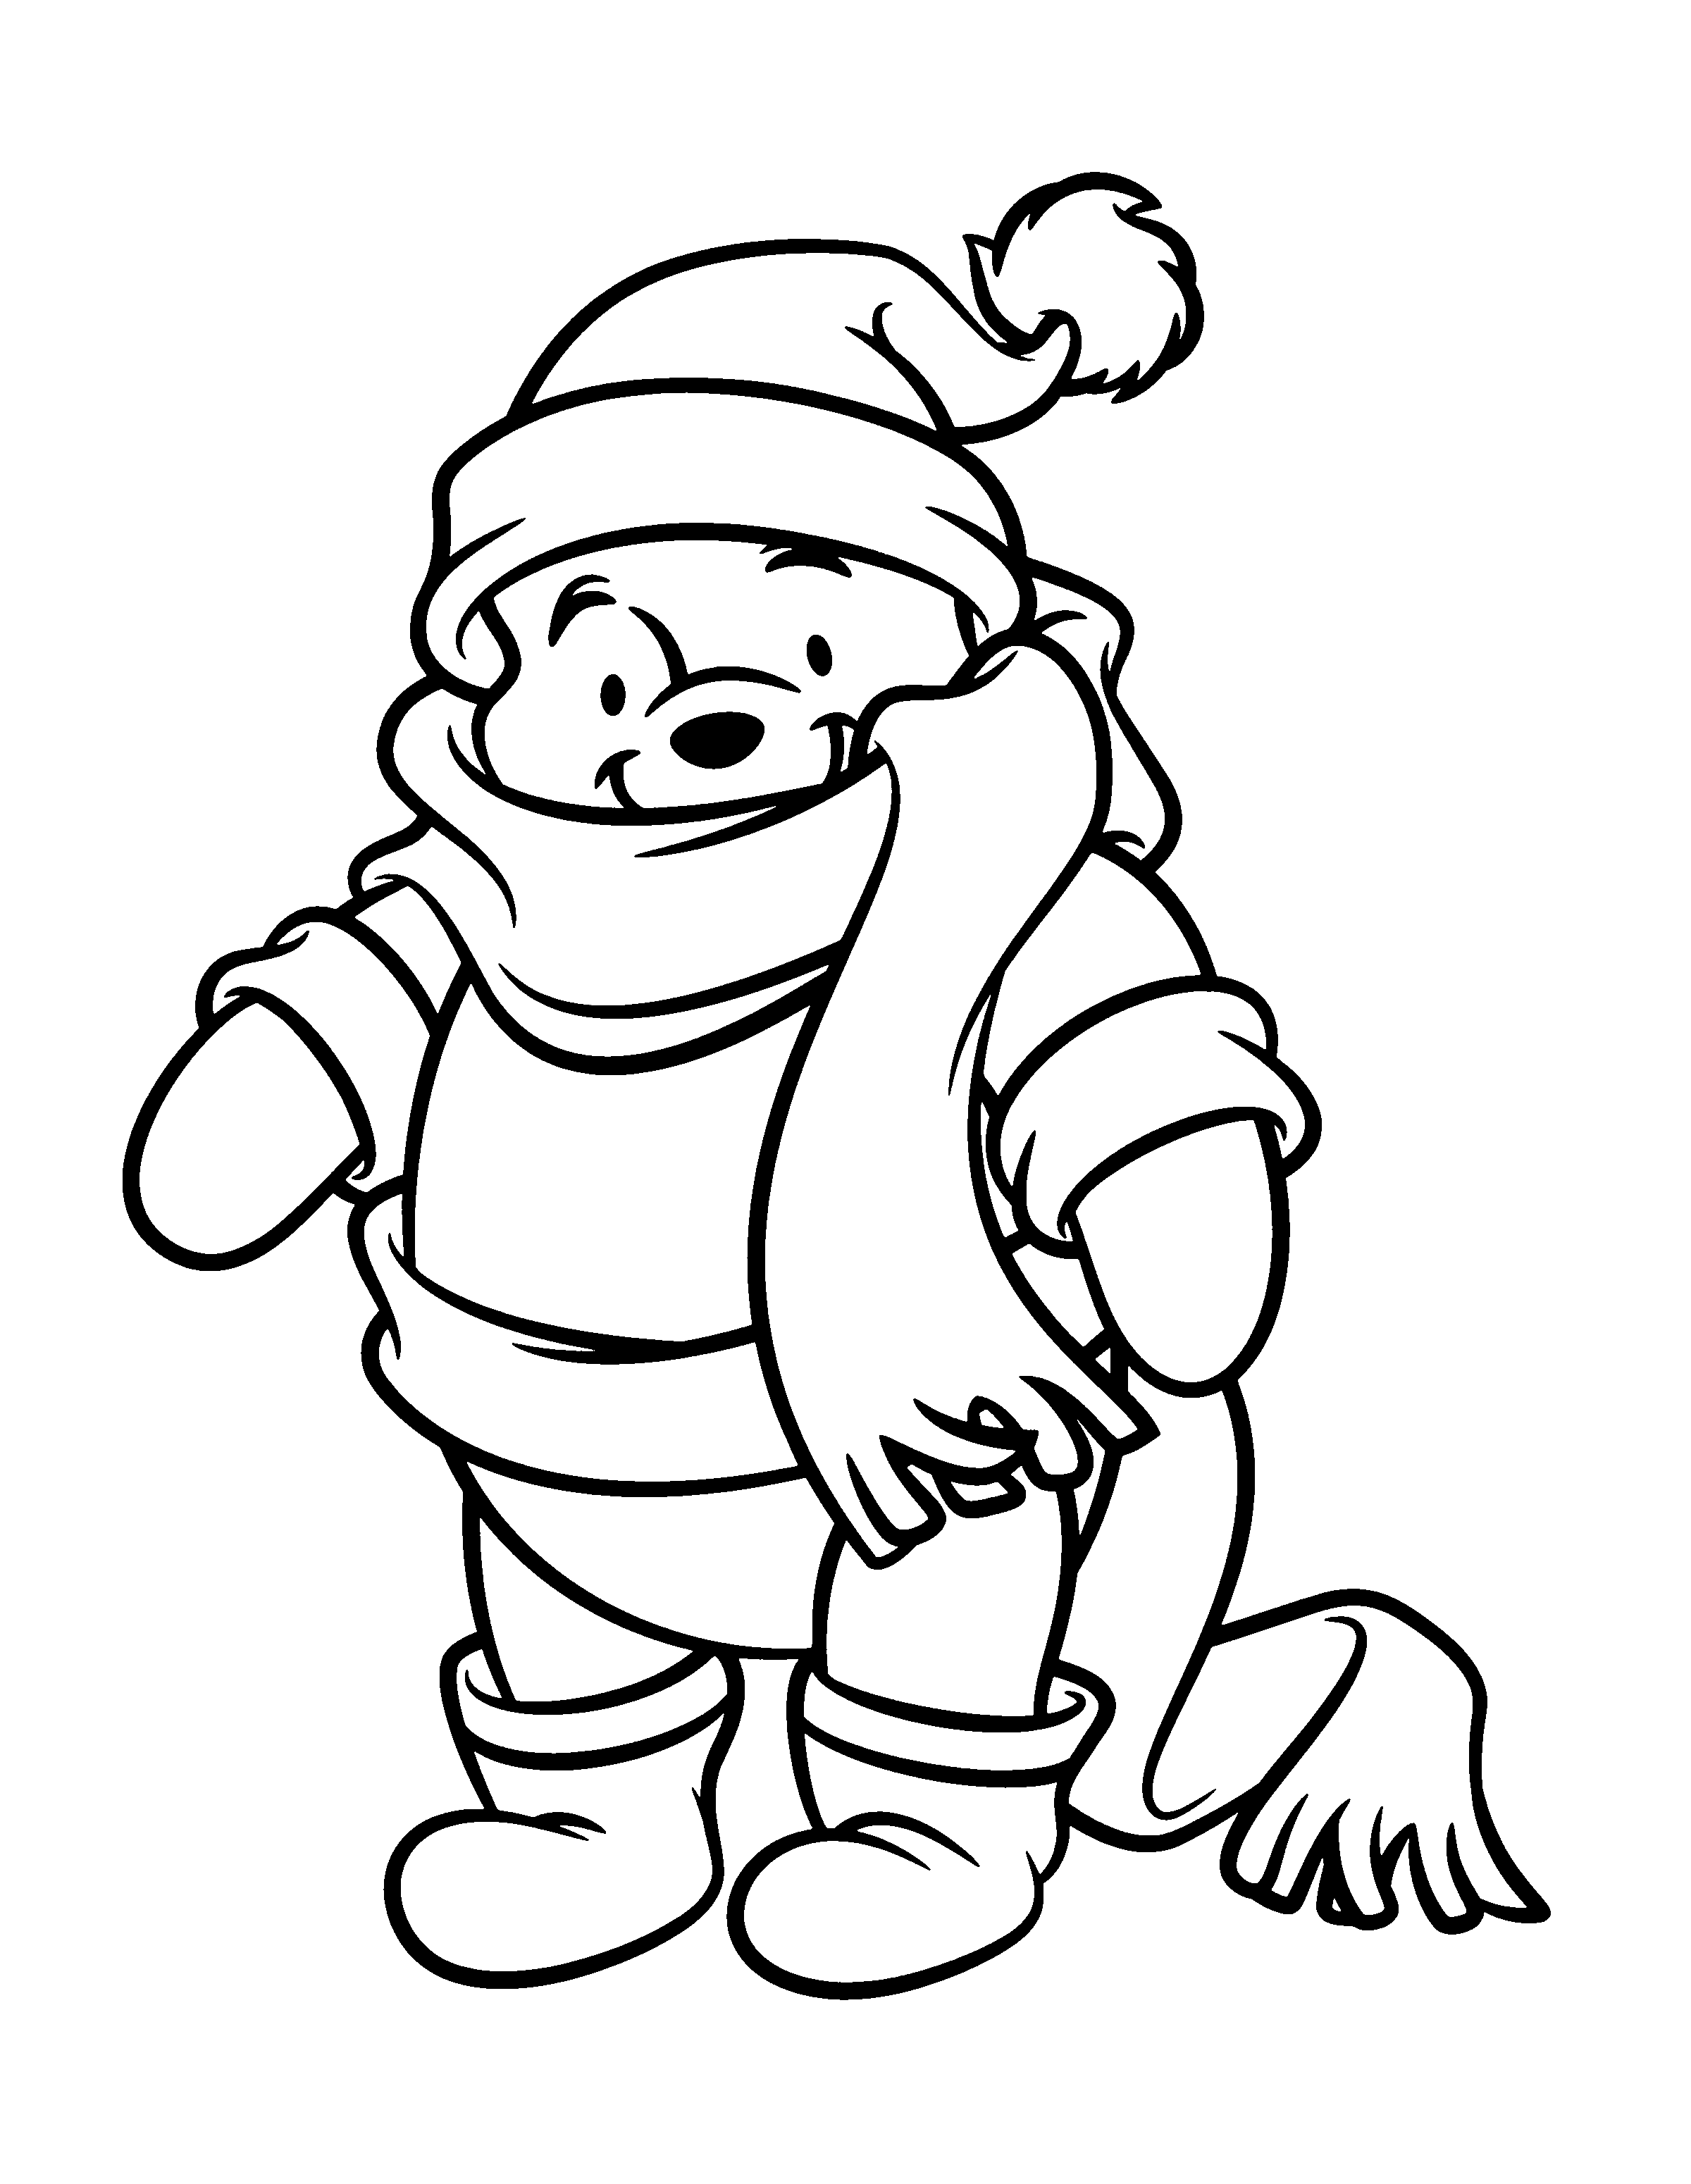 Free Printable Winnie The Pooh Coloring Pages For Kids Disney Coloring Pages Coloring